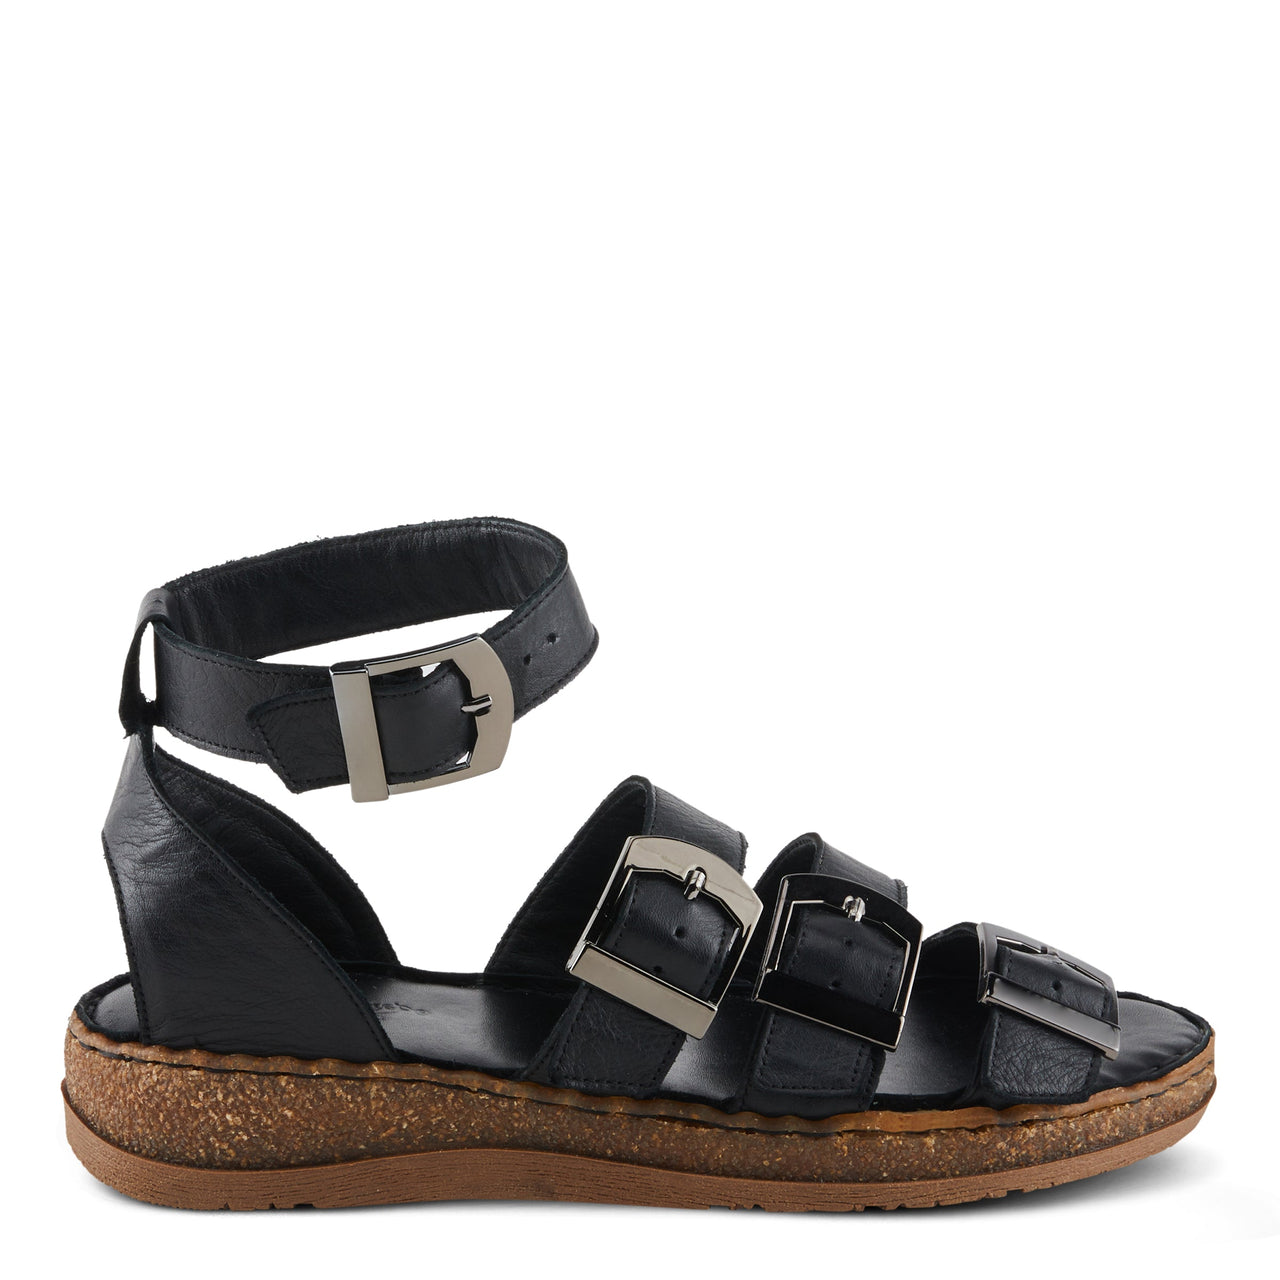 Spring Step Alexcia Sandals: Women's black leather open-toe sandals with floral design and cushioned insole for all-day comfort and style